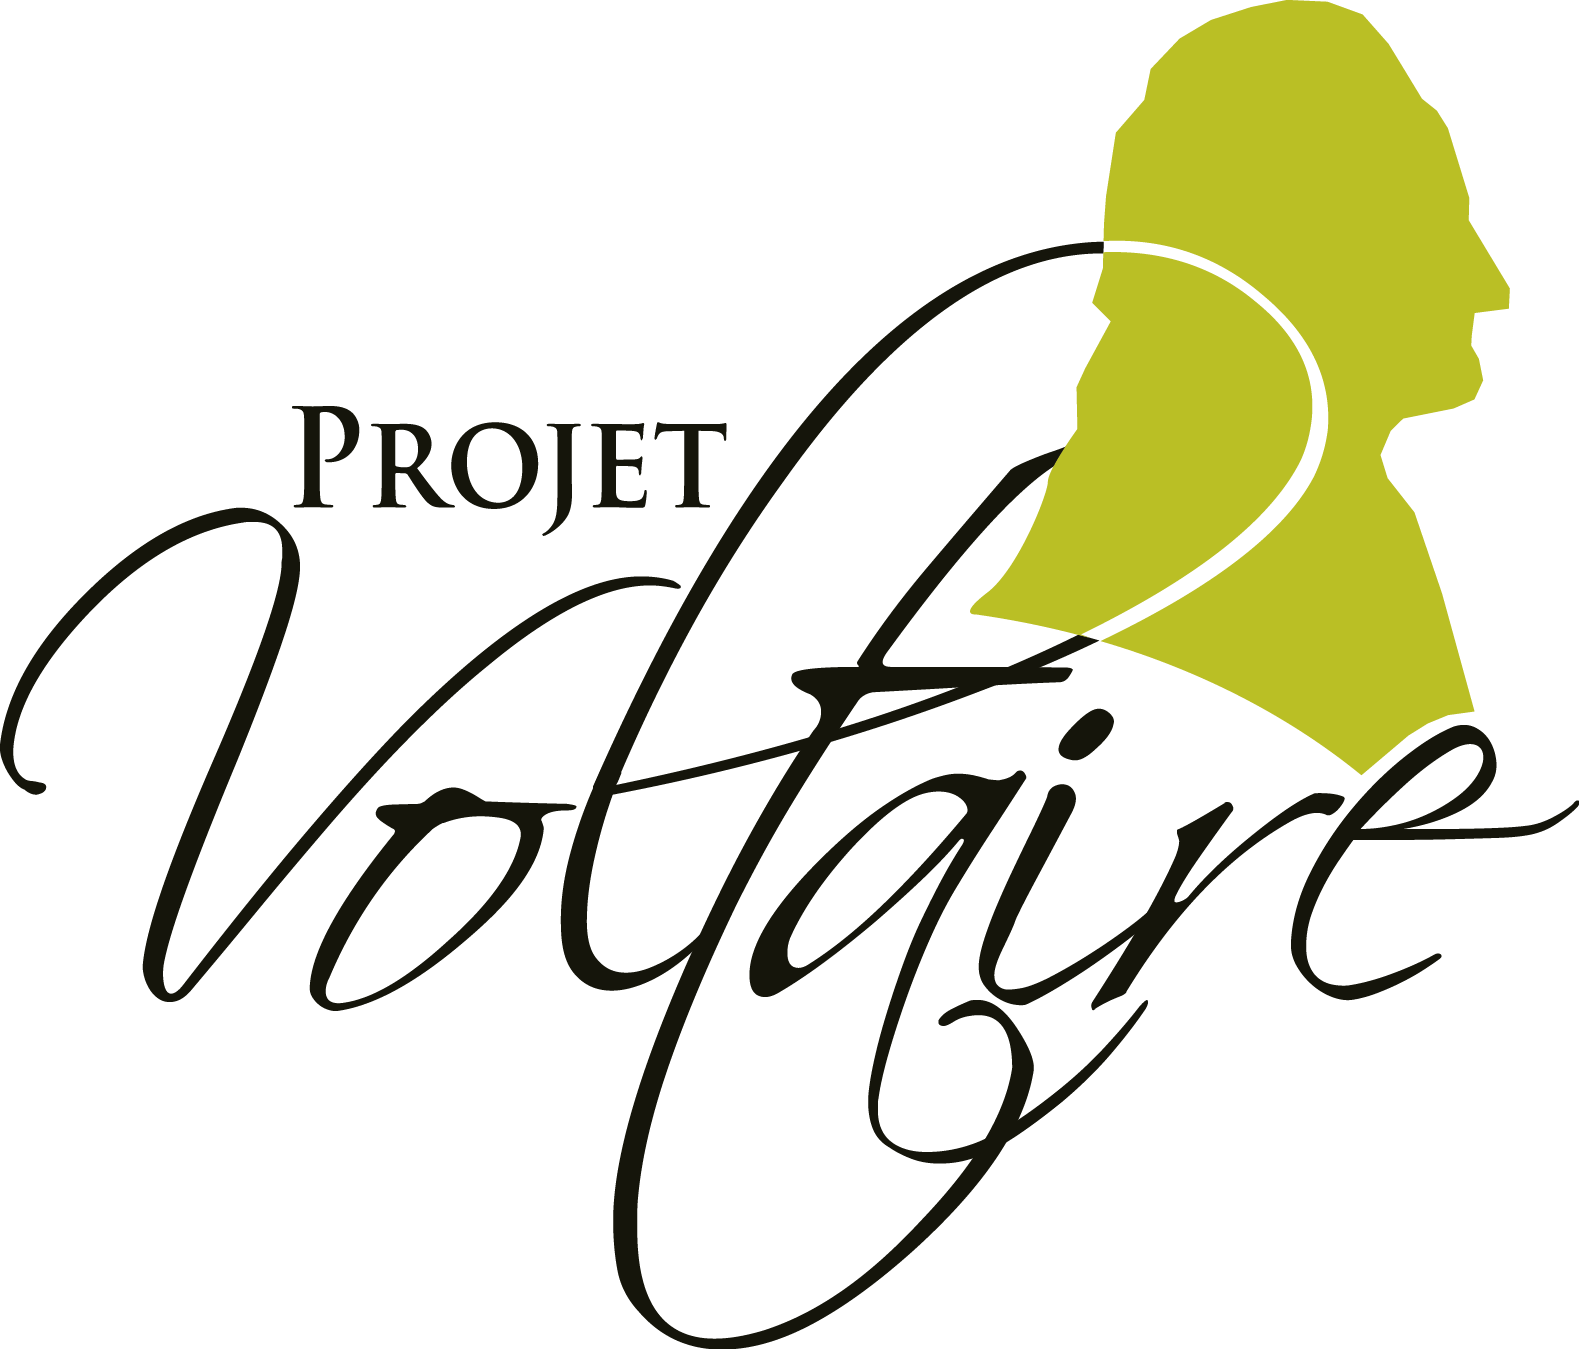 Voltaire Logo - WOONOZ - PROJET VOLTAIRE - Learning Technologies France 2018 Eng